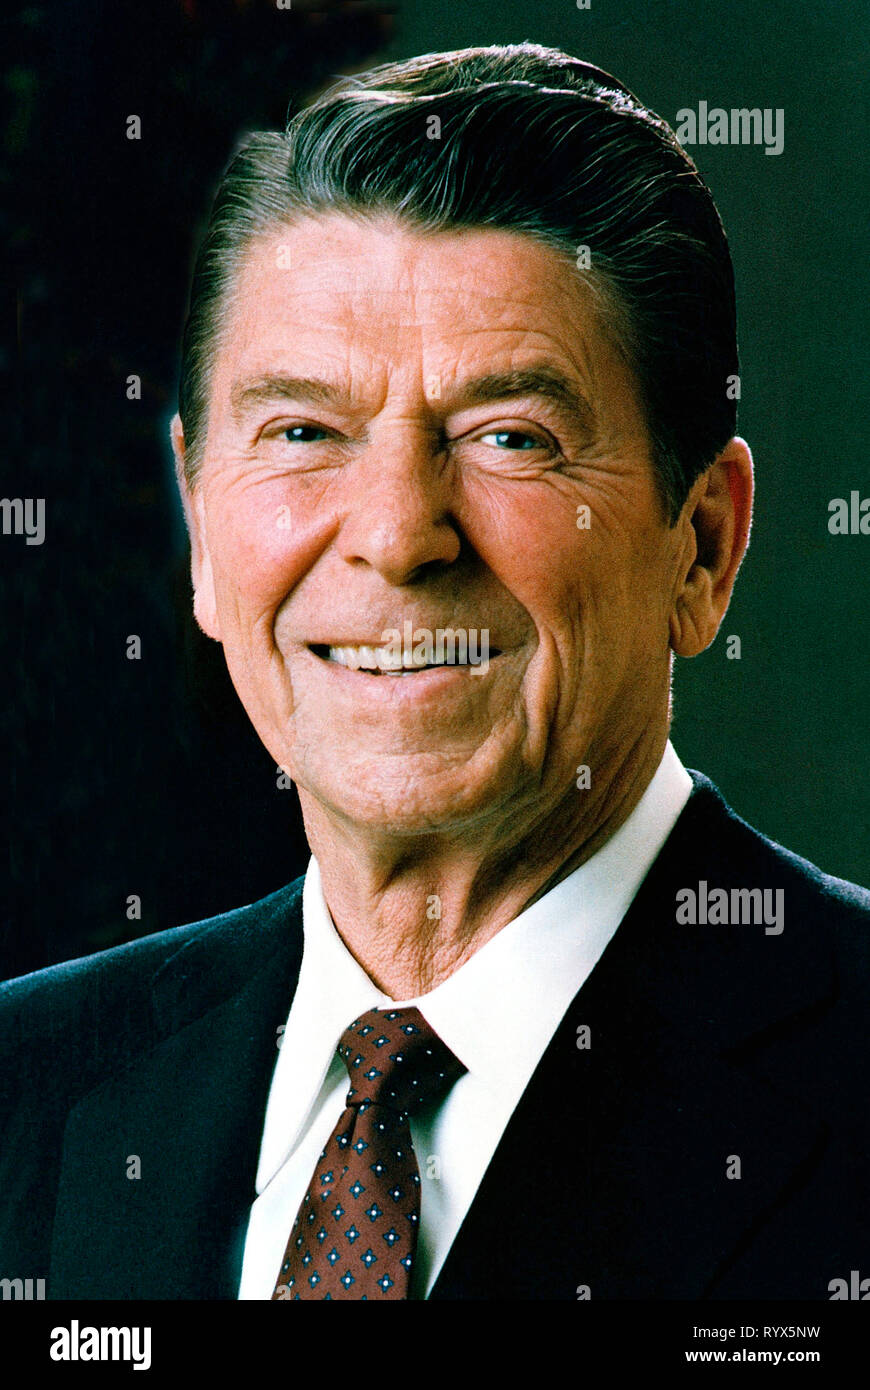 Ronald Reagan - *06.02.1911 - 05.06.2004 - 40th President of the United States of America. Stock Photo